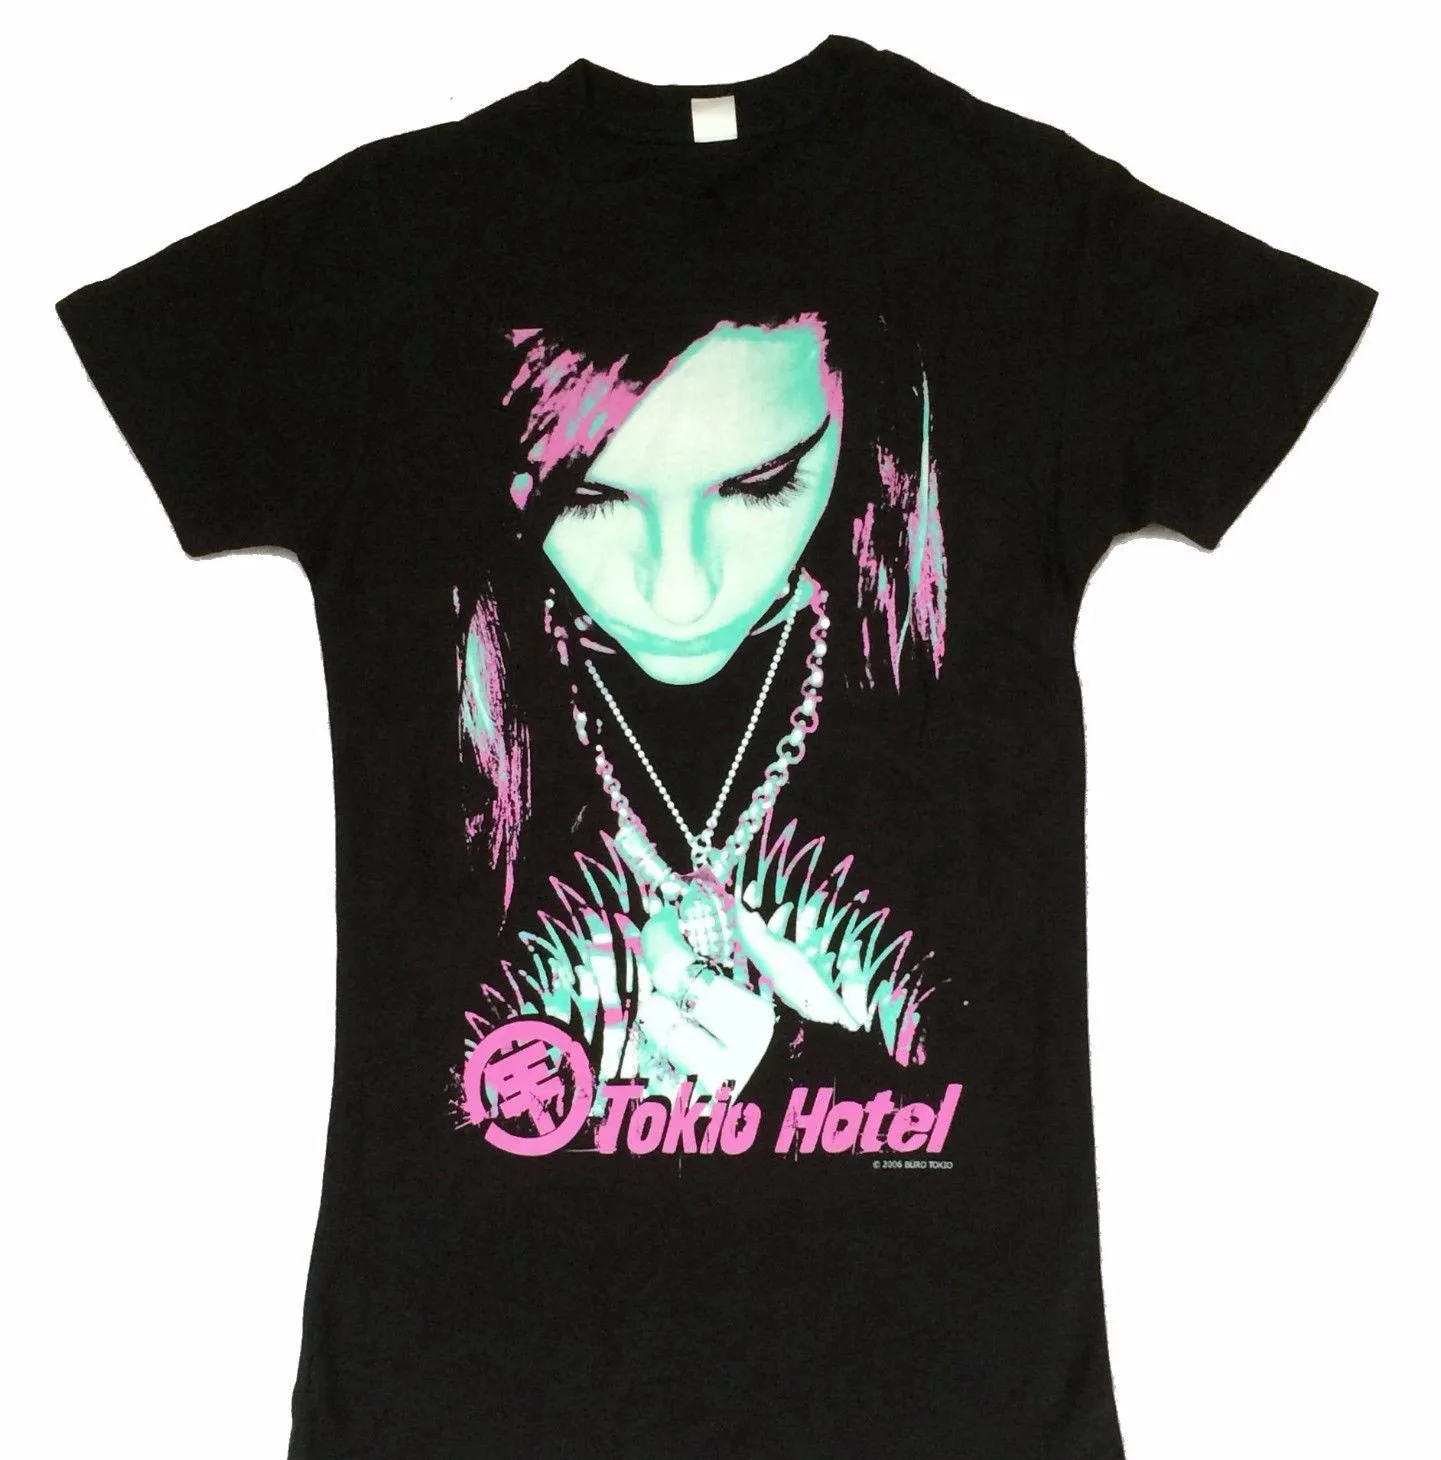 

Women'S Tee Tokio Hotel Singer Face Image Girls Juniors Black Shirt New Official Band Merch Interesting Pictures